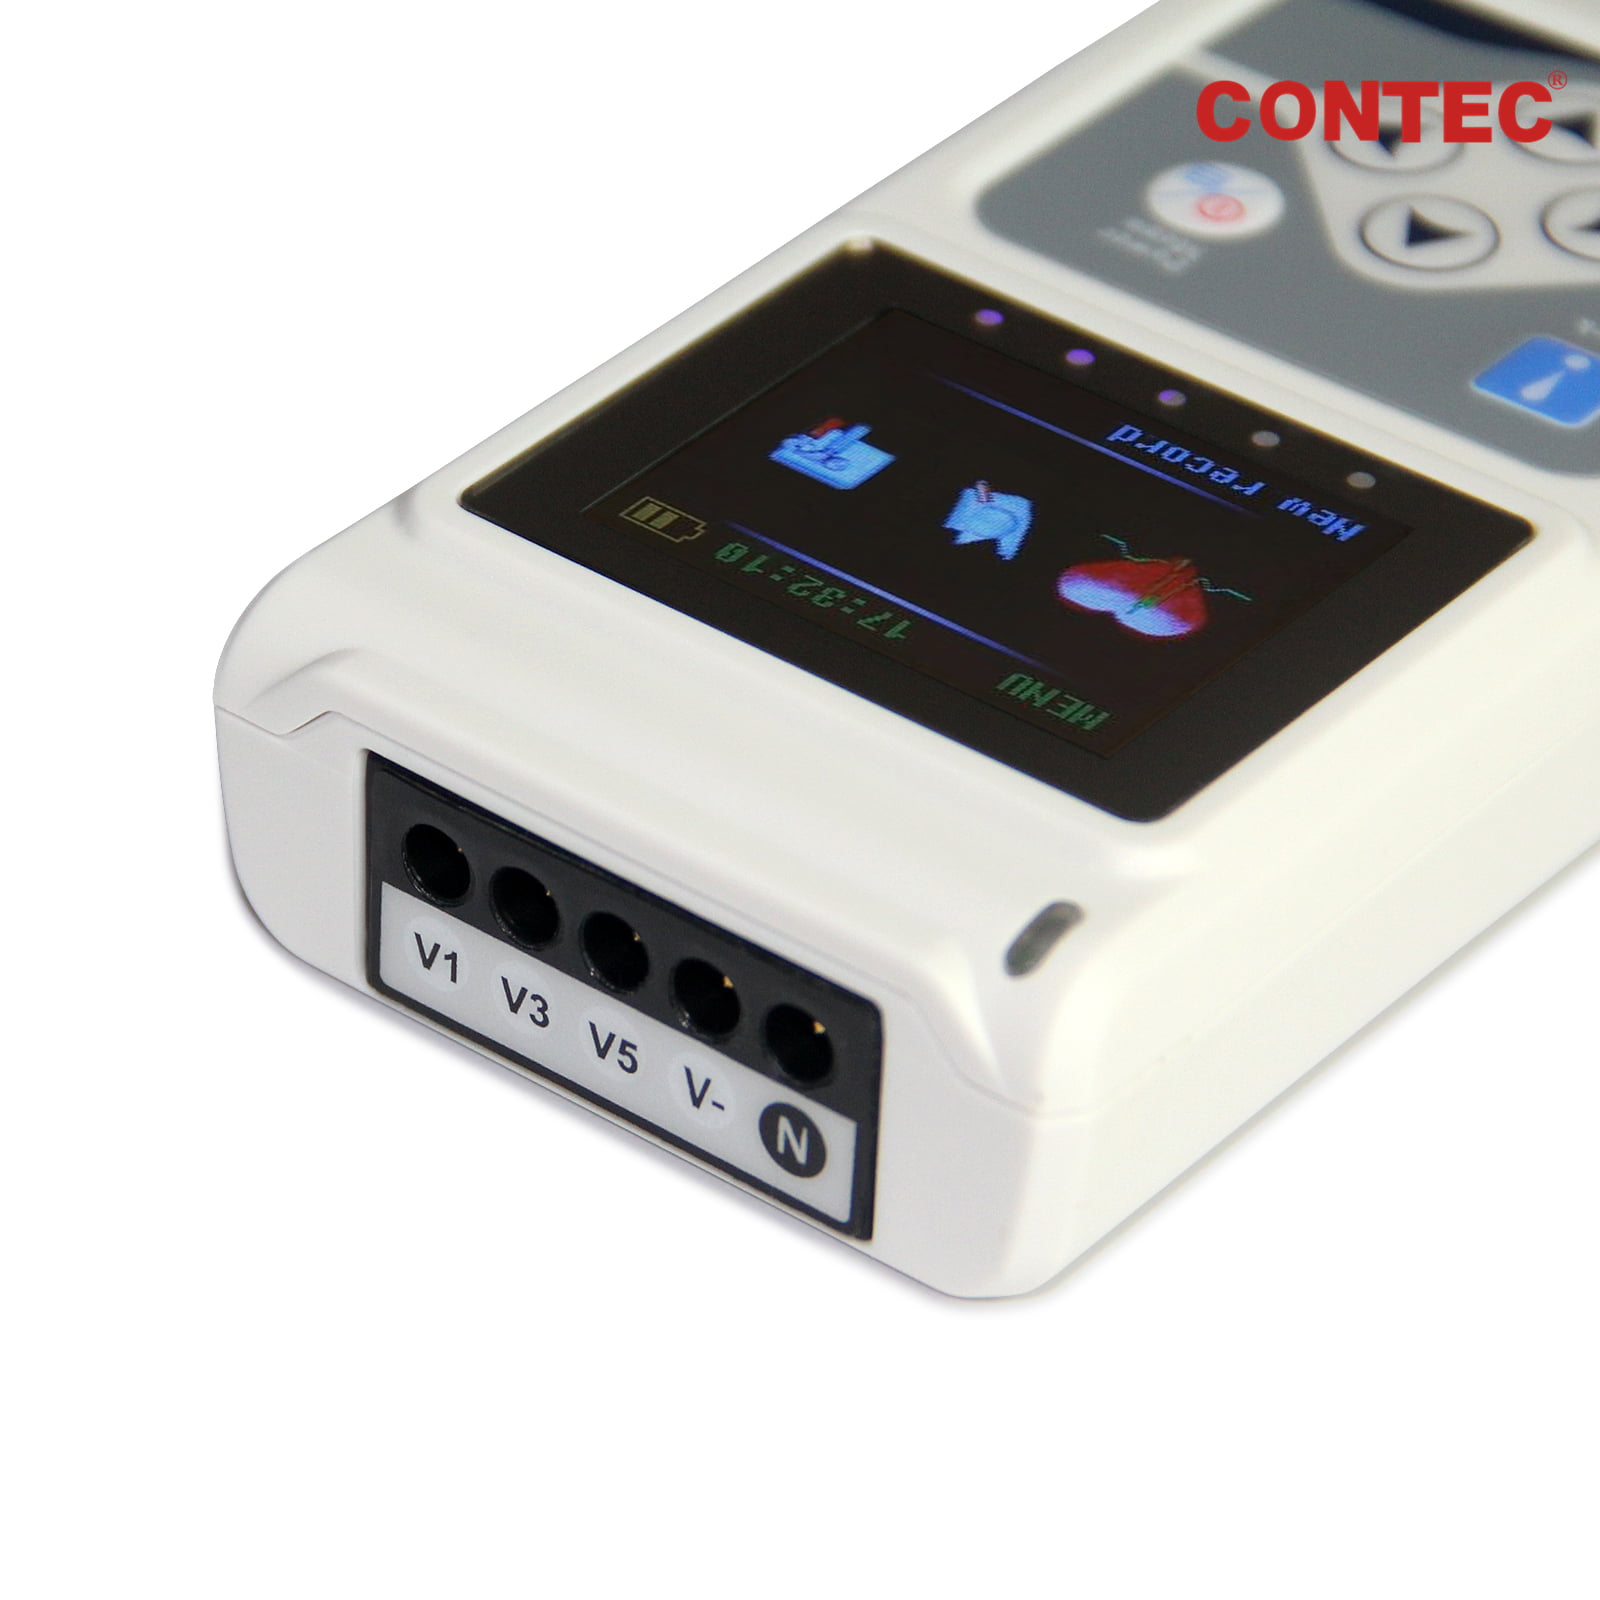 3 Channels ECG Holter, EKG Holter, ECG Monitor System,24 Hours ECG  Recorder: Buy Online at Best Price in UAE 